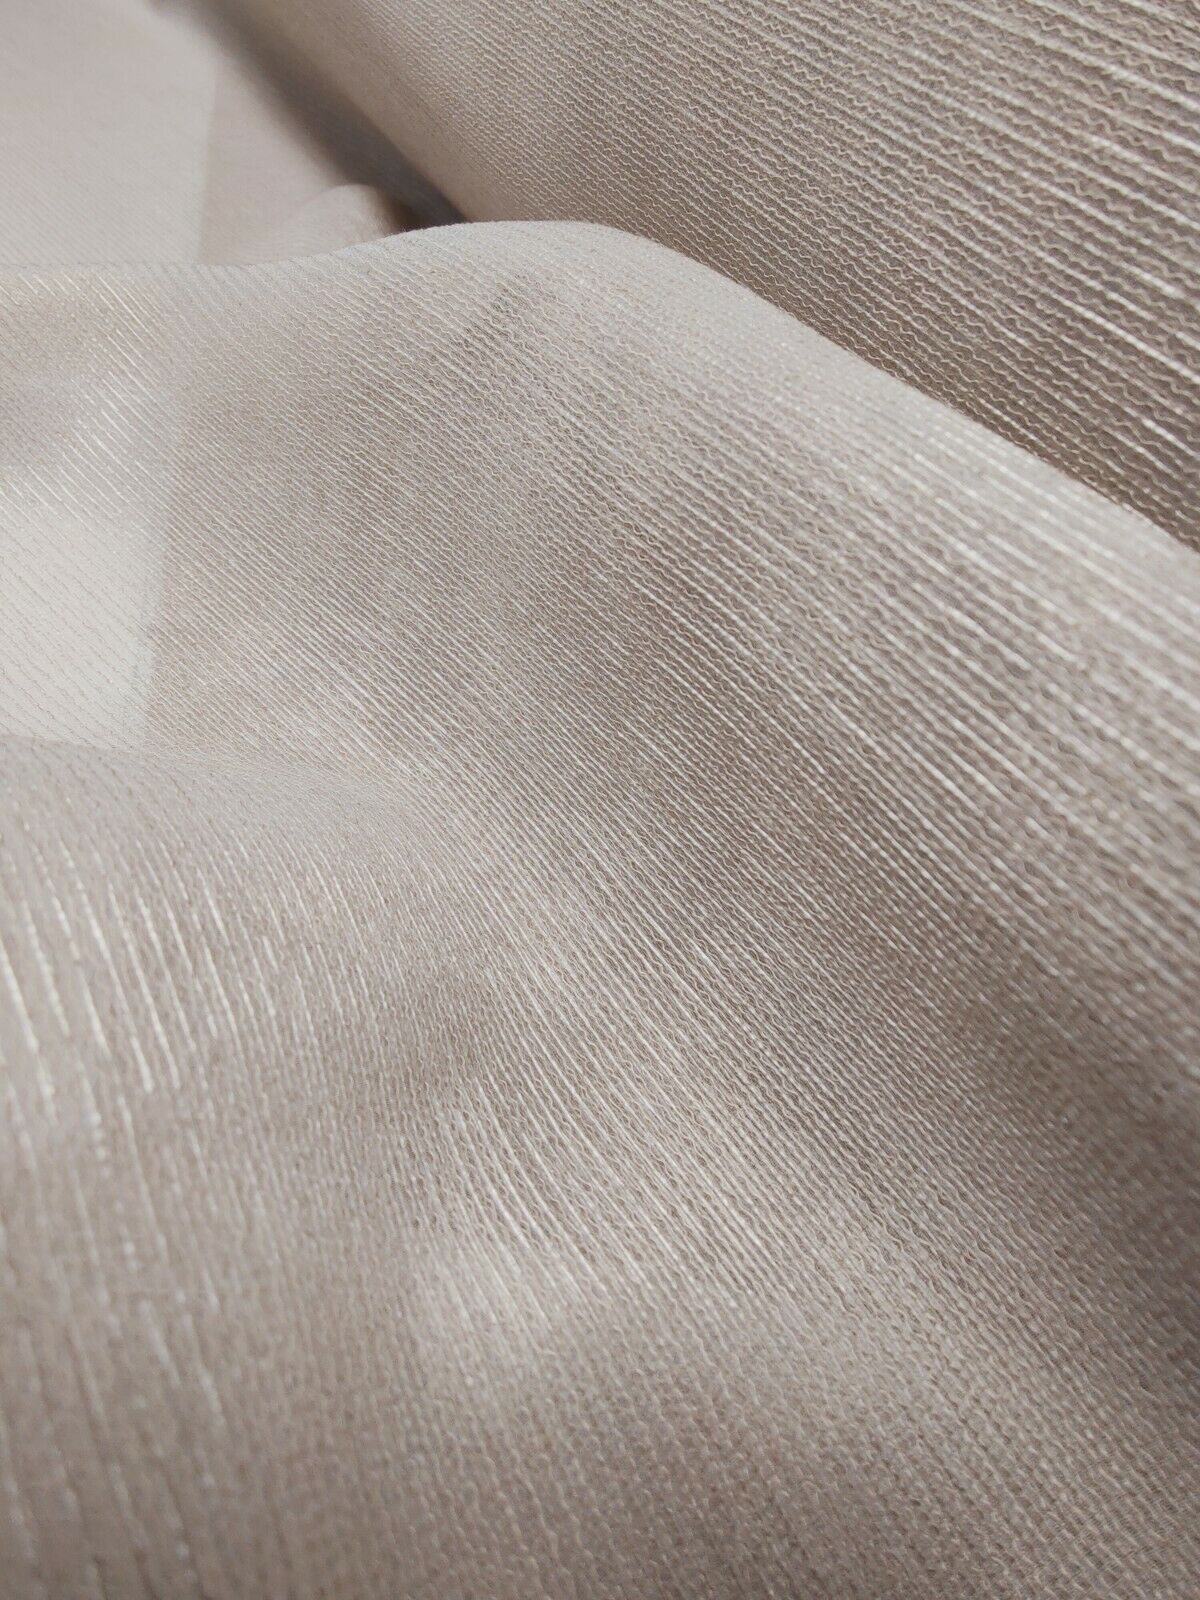 Dina Vanelli Crystal Oyster Striped Voile Per Metre